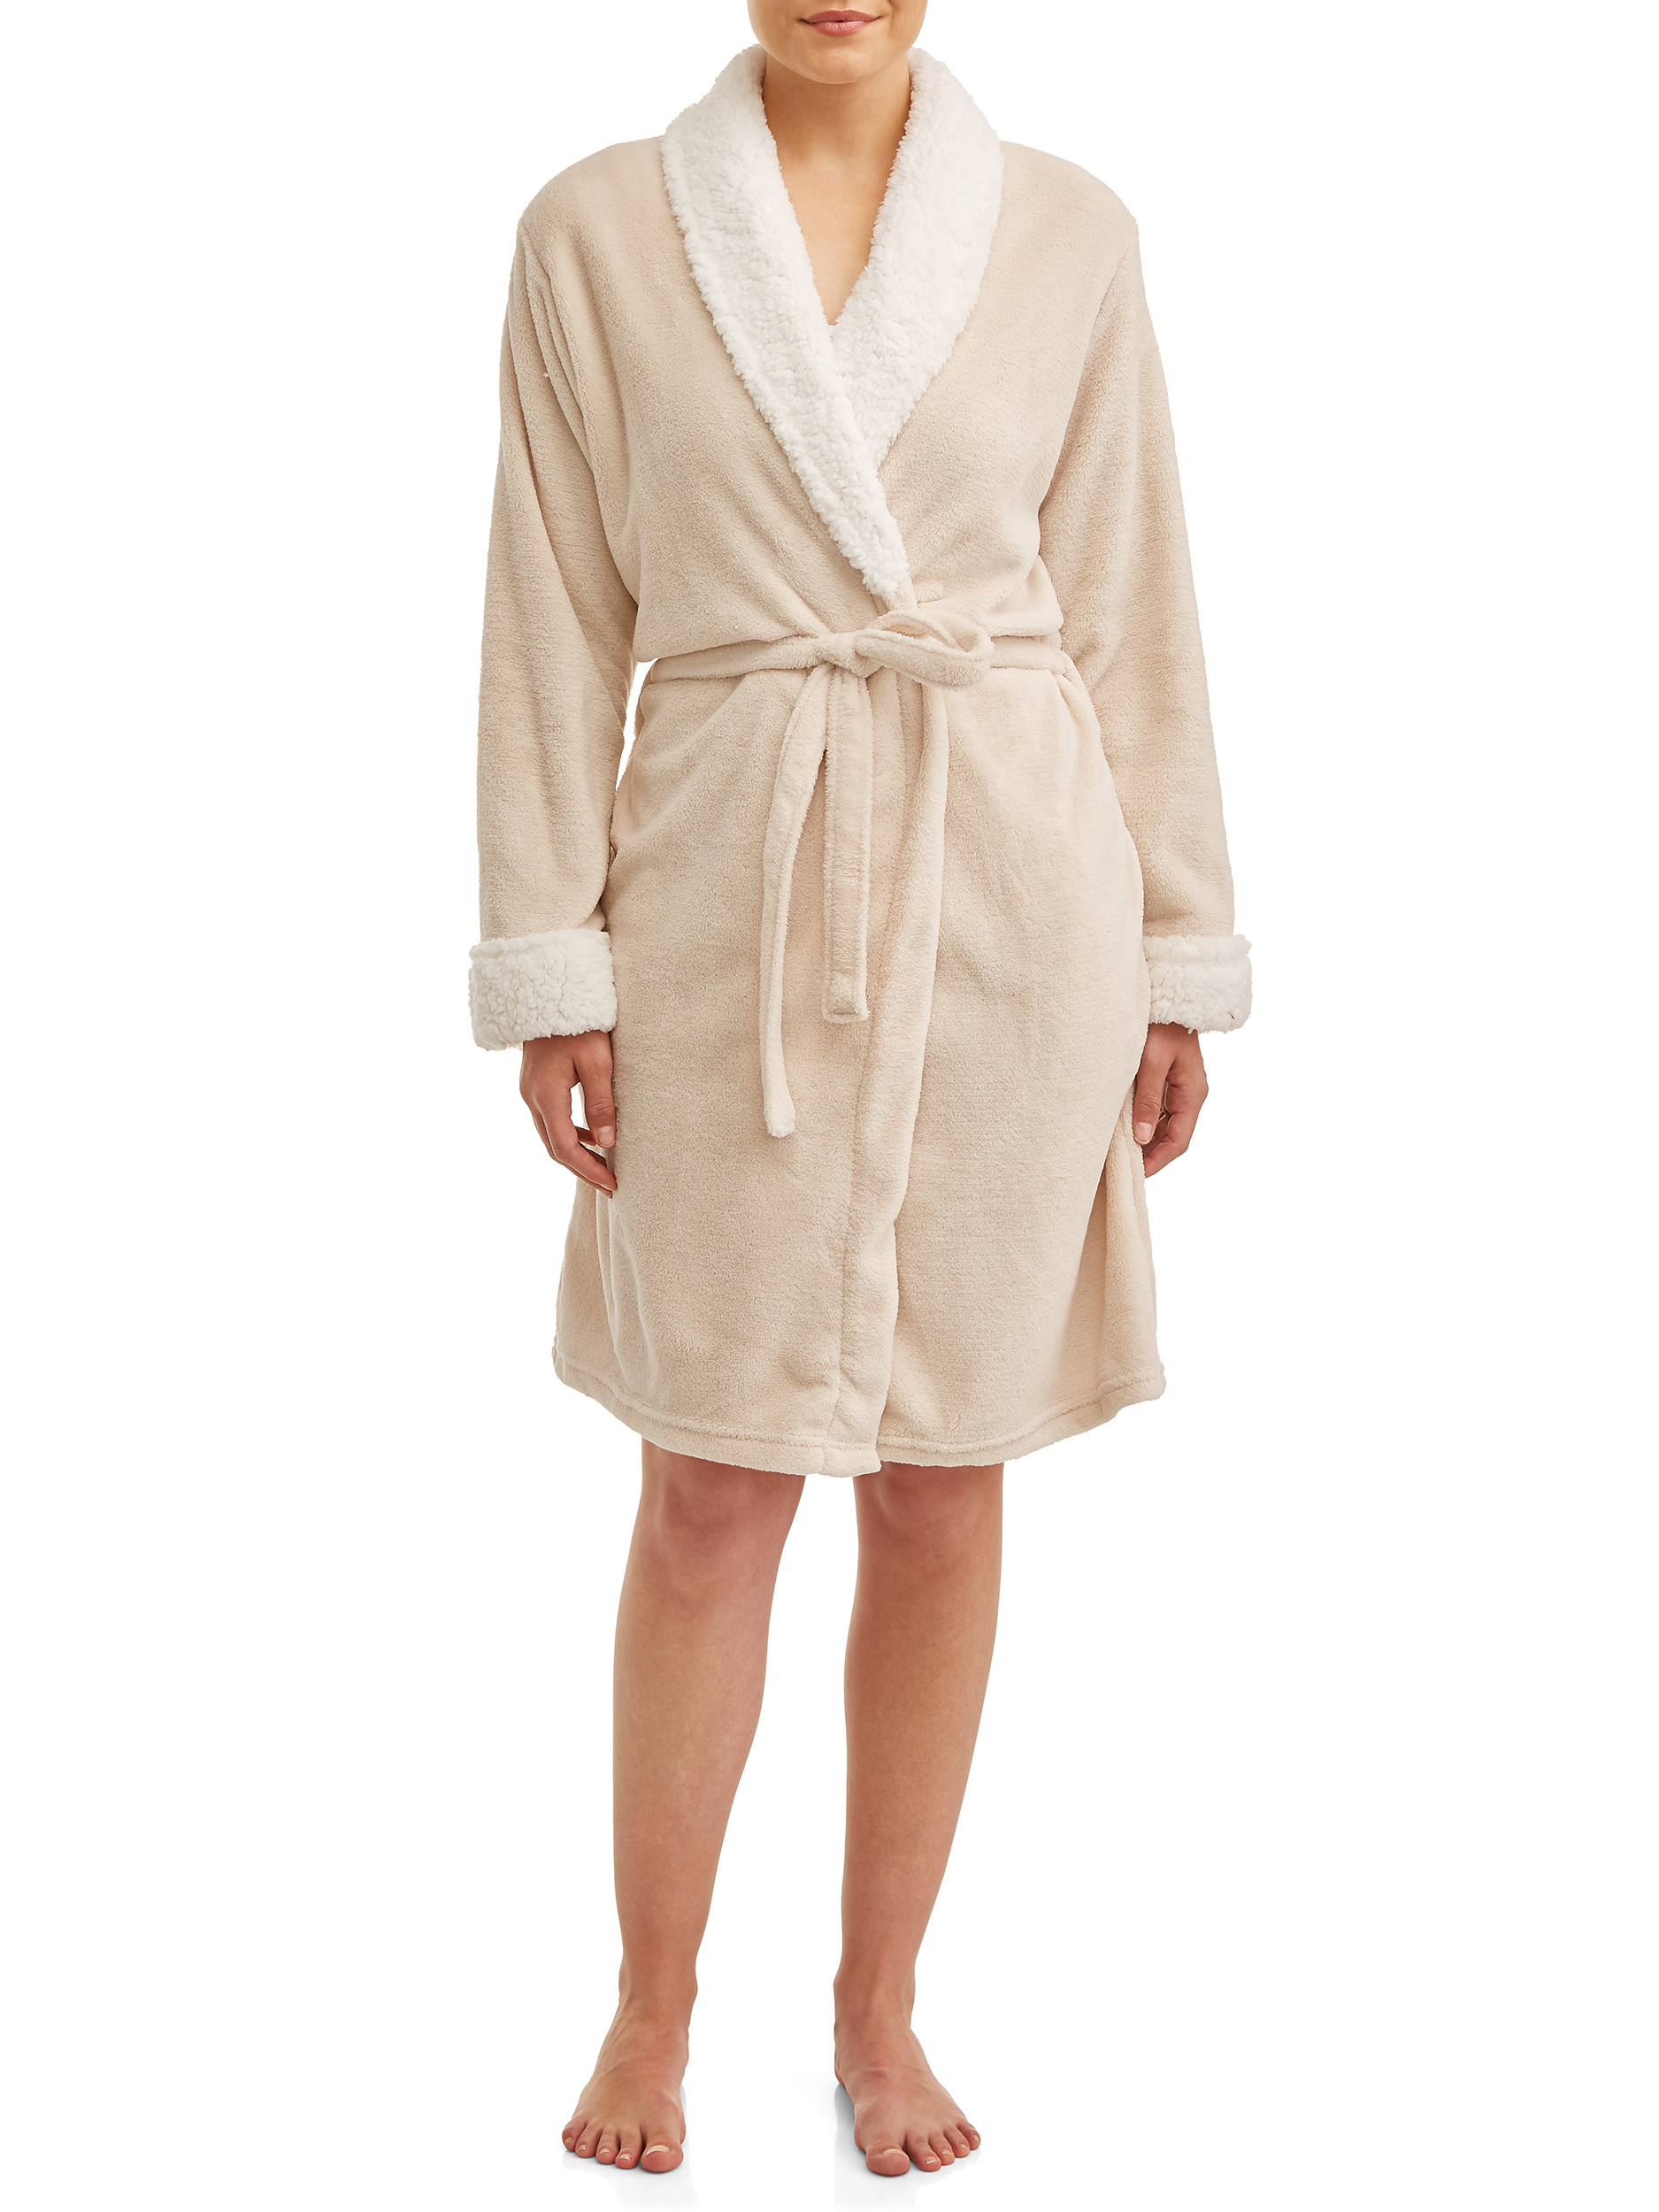 Blue Star Clothing Women's 3/4 Length Plush Body Robe with Sherpa Trim Collar - image 1 of 3